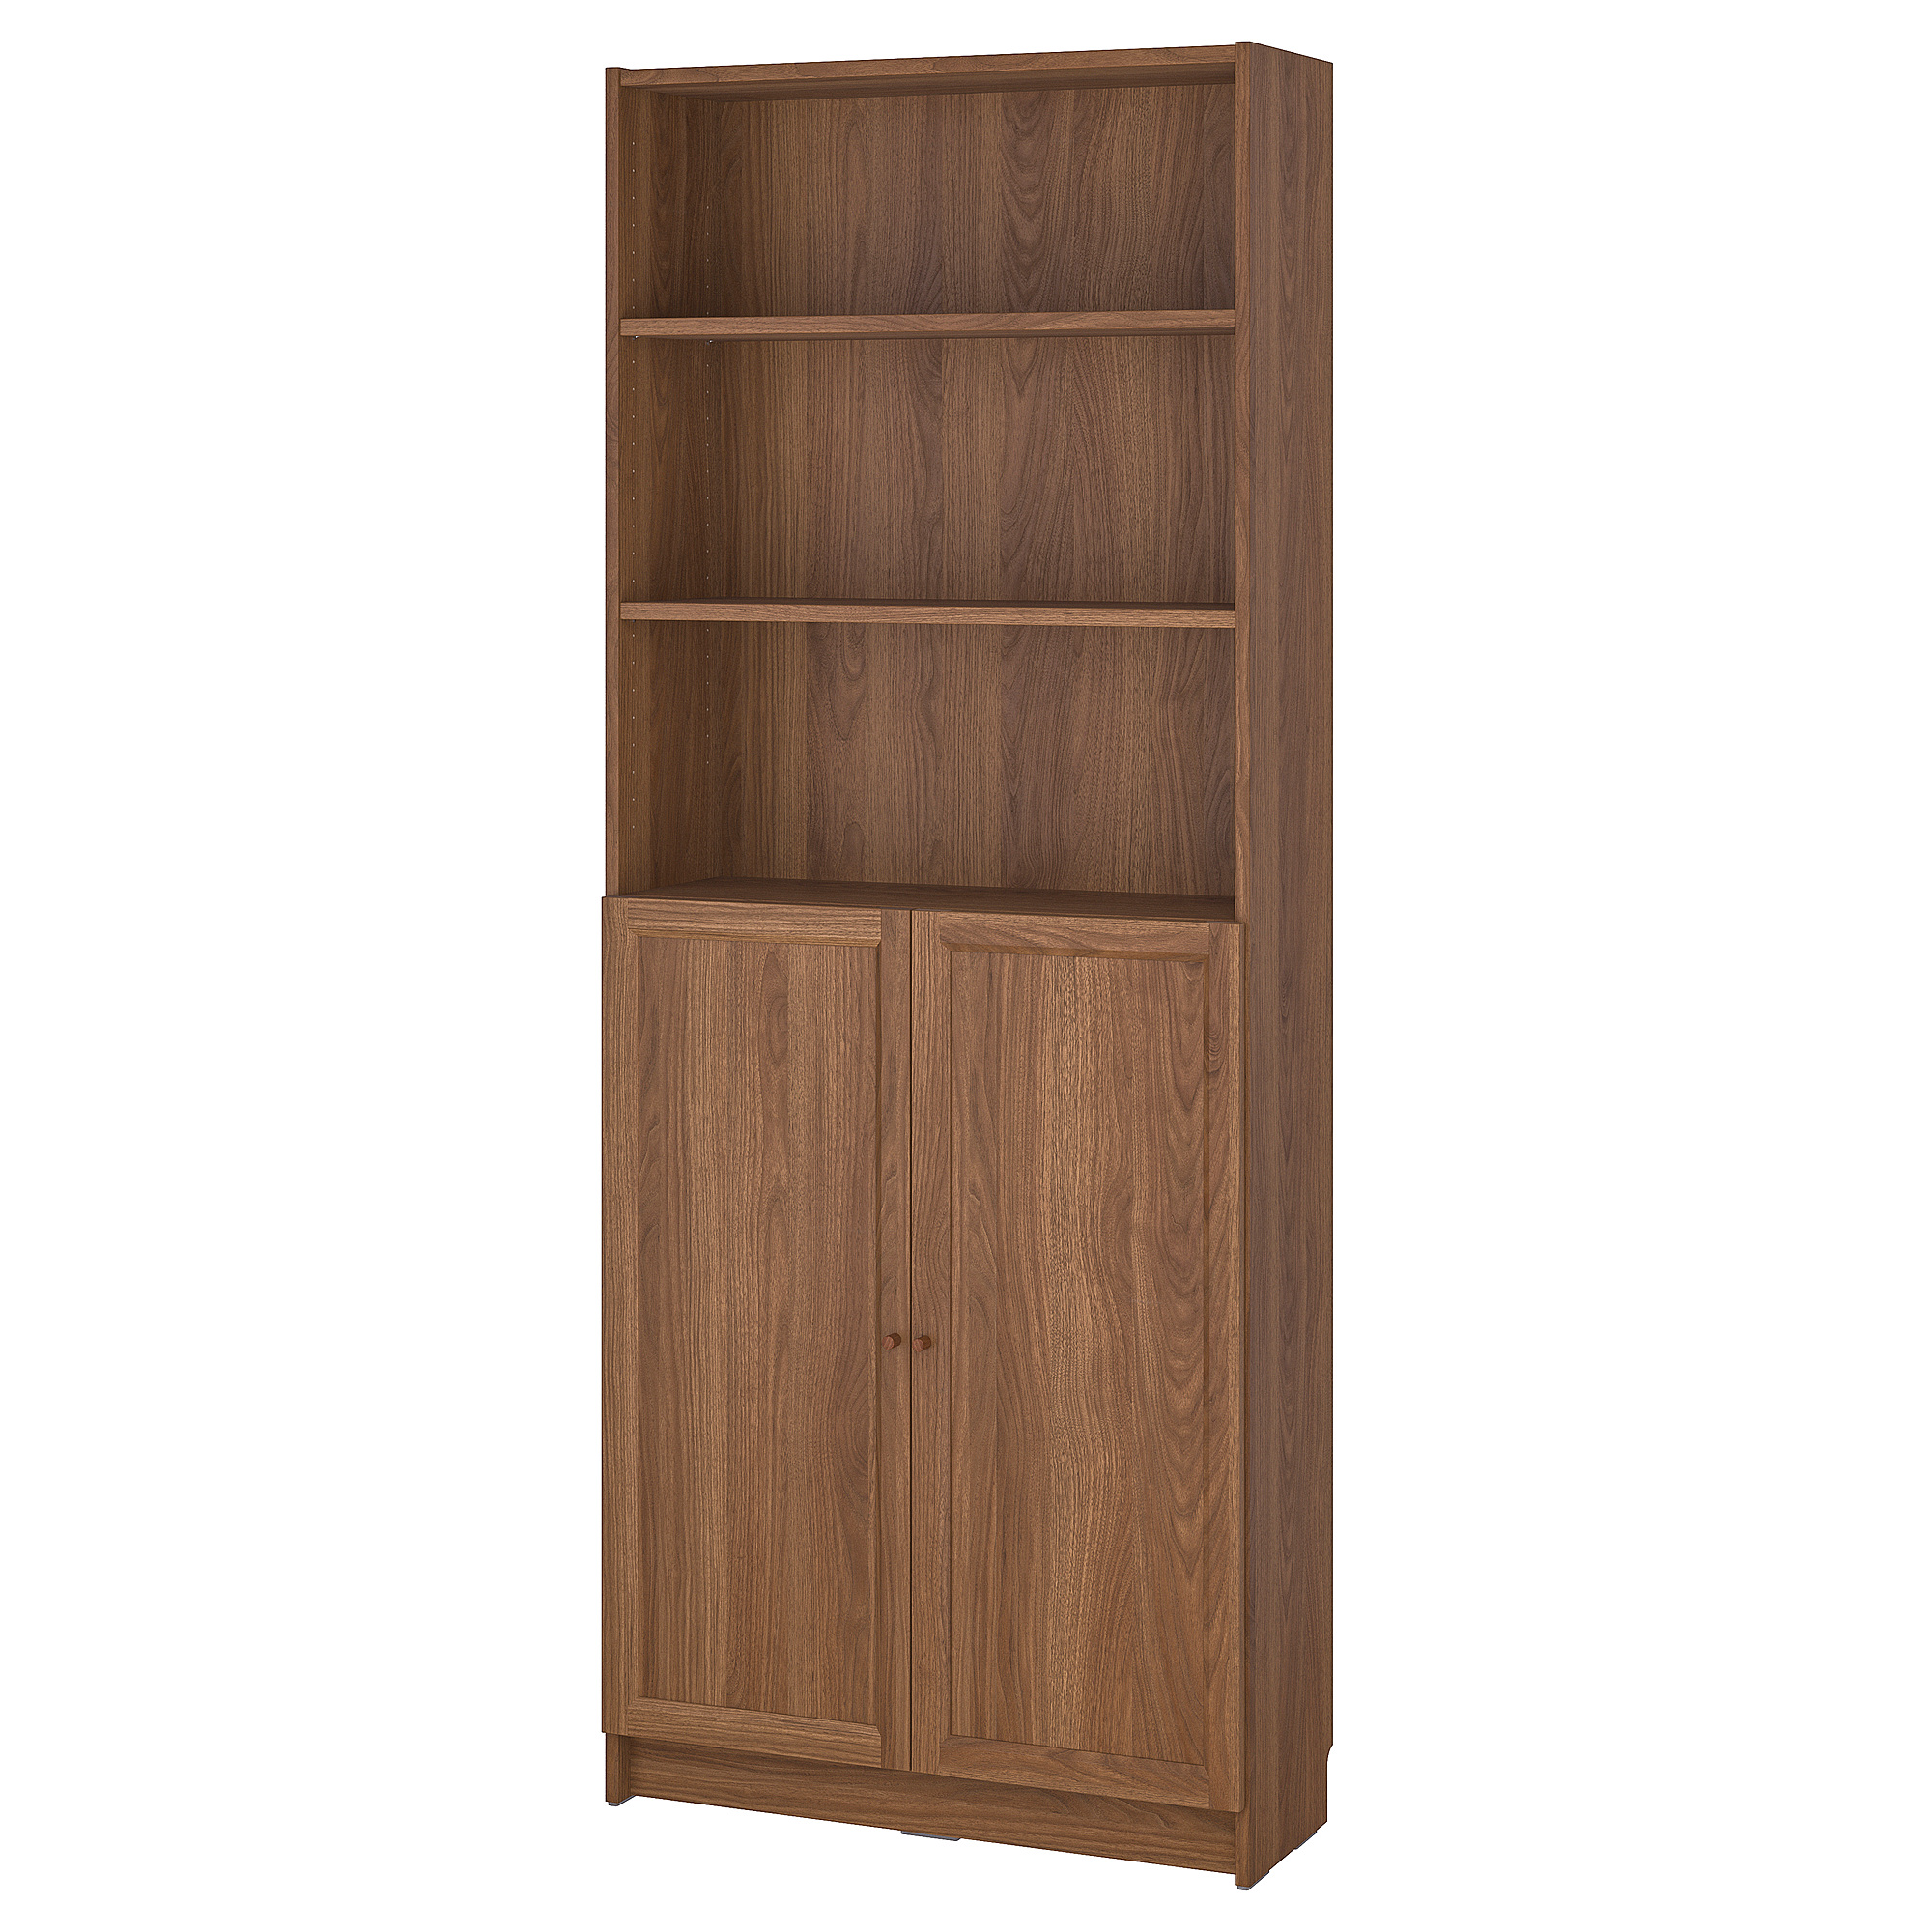 BILLY/OXBERG bookcase with doors